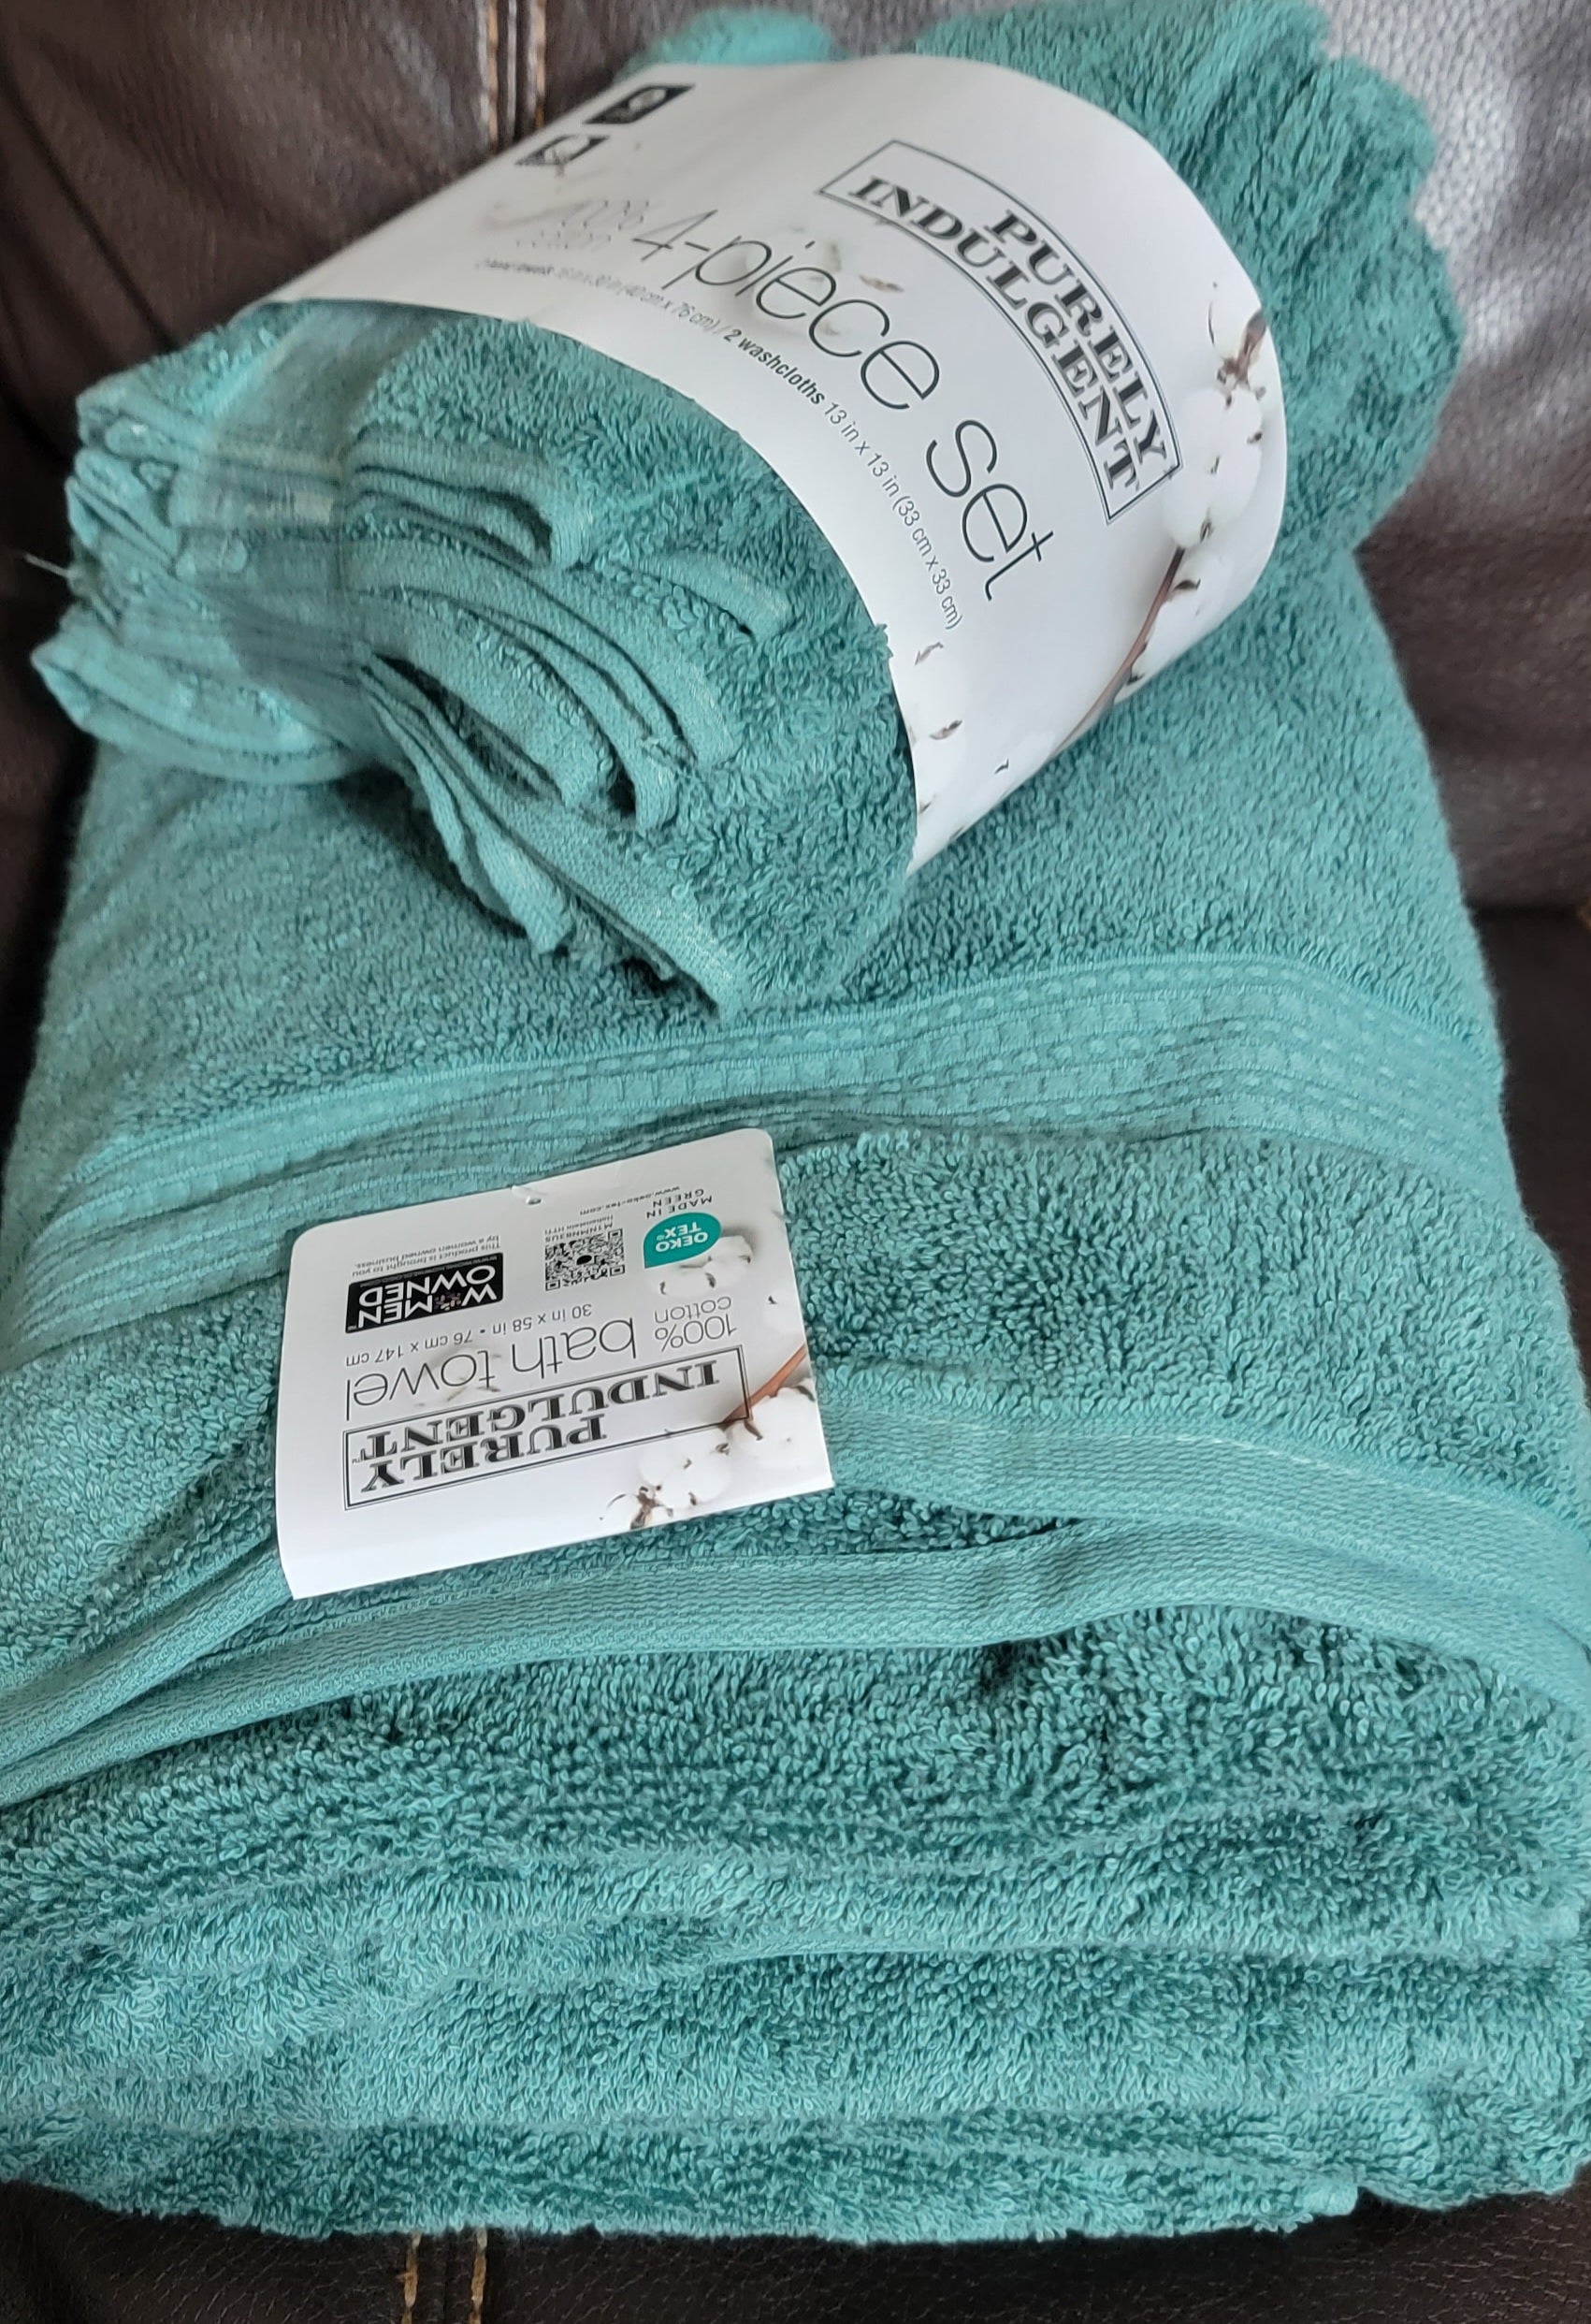 Purely Indulgent 100% Bath towel made by Women Owned 